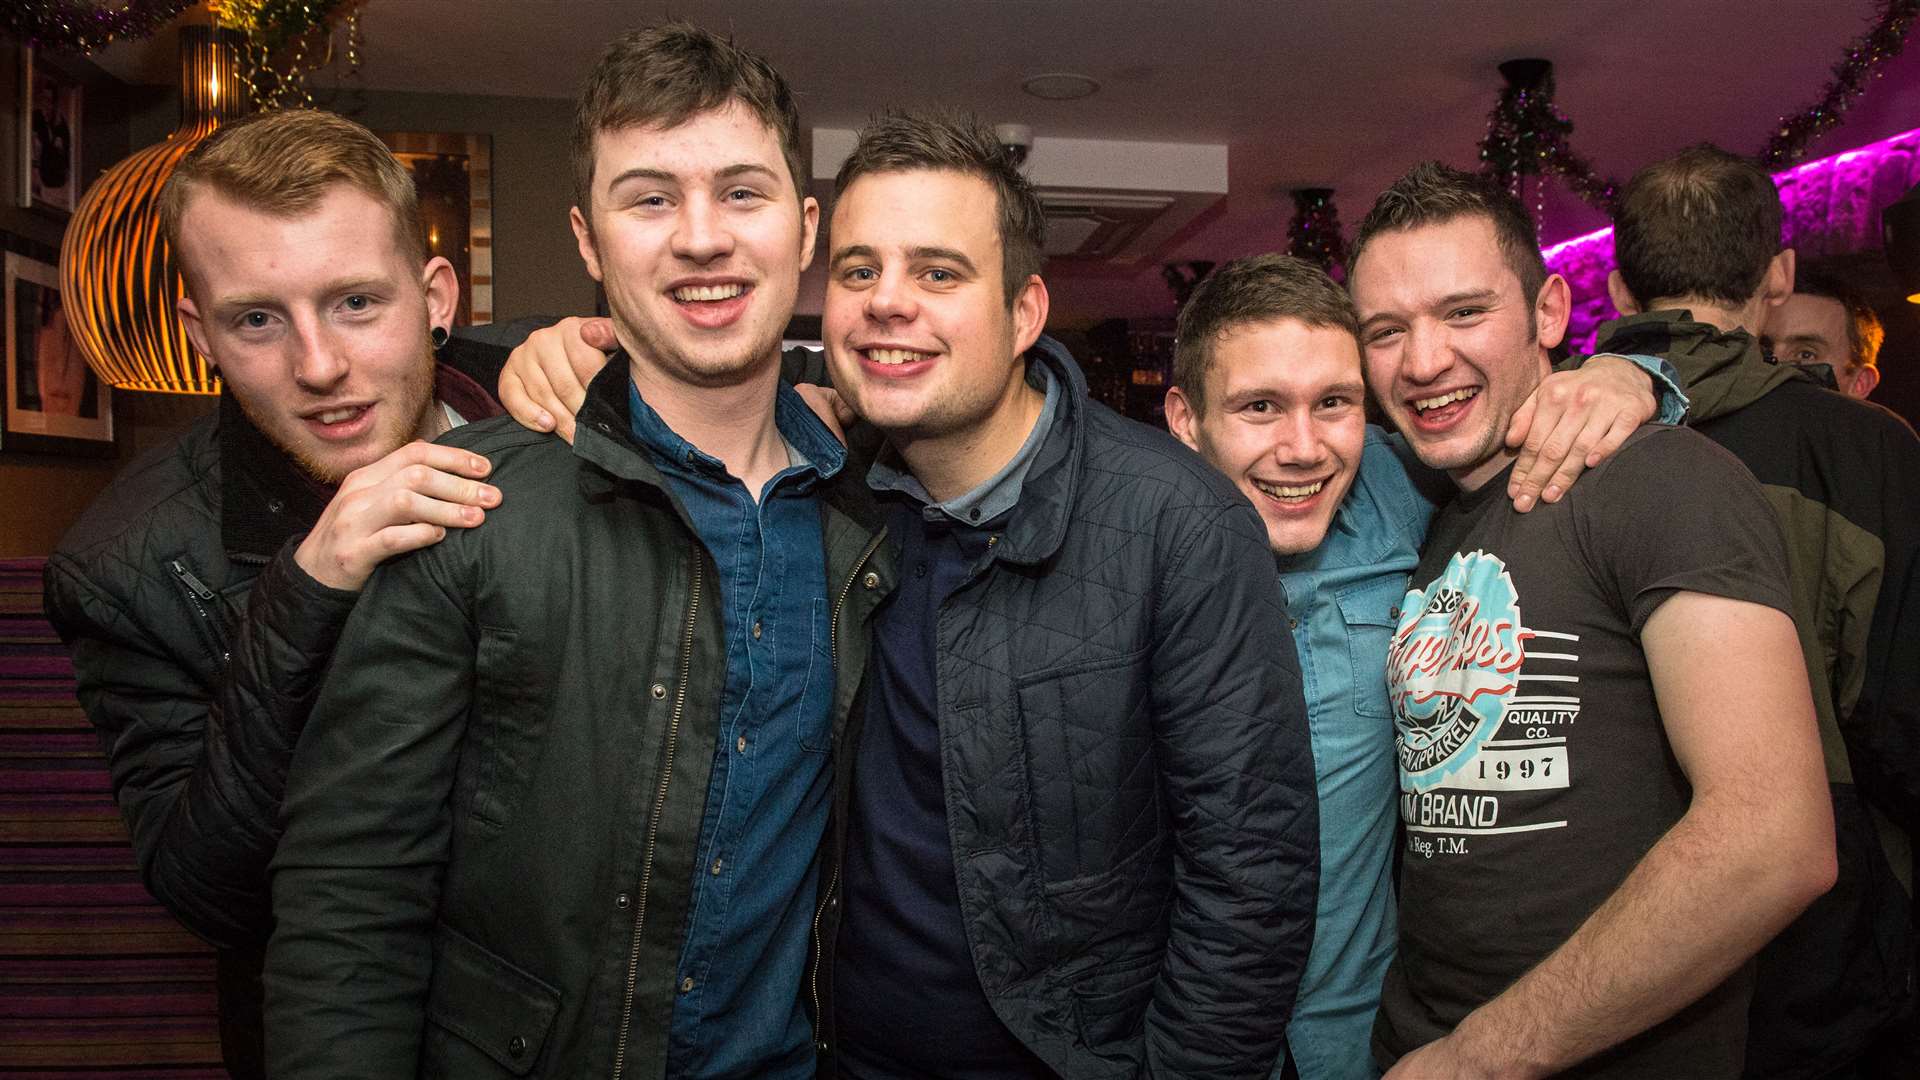 Graham Brown (second left) in The Den celebrating his 22nd birthday.